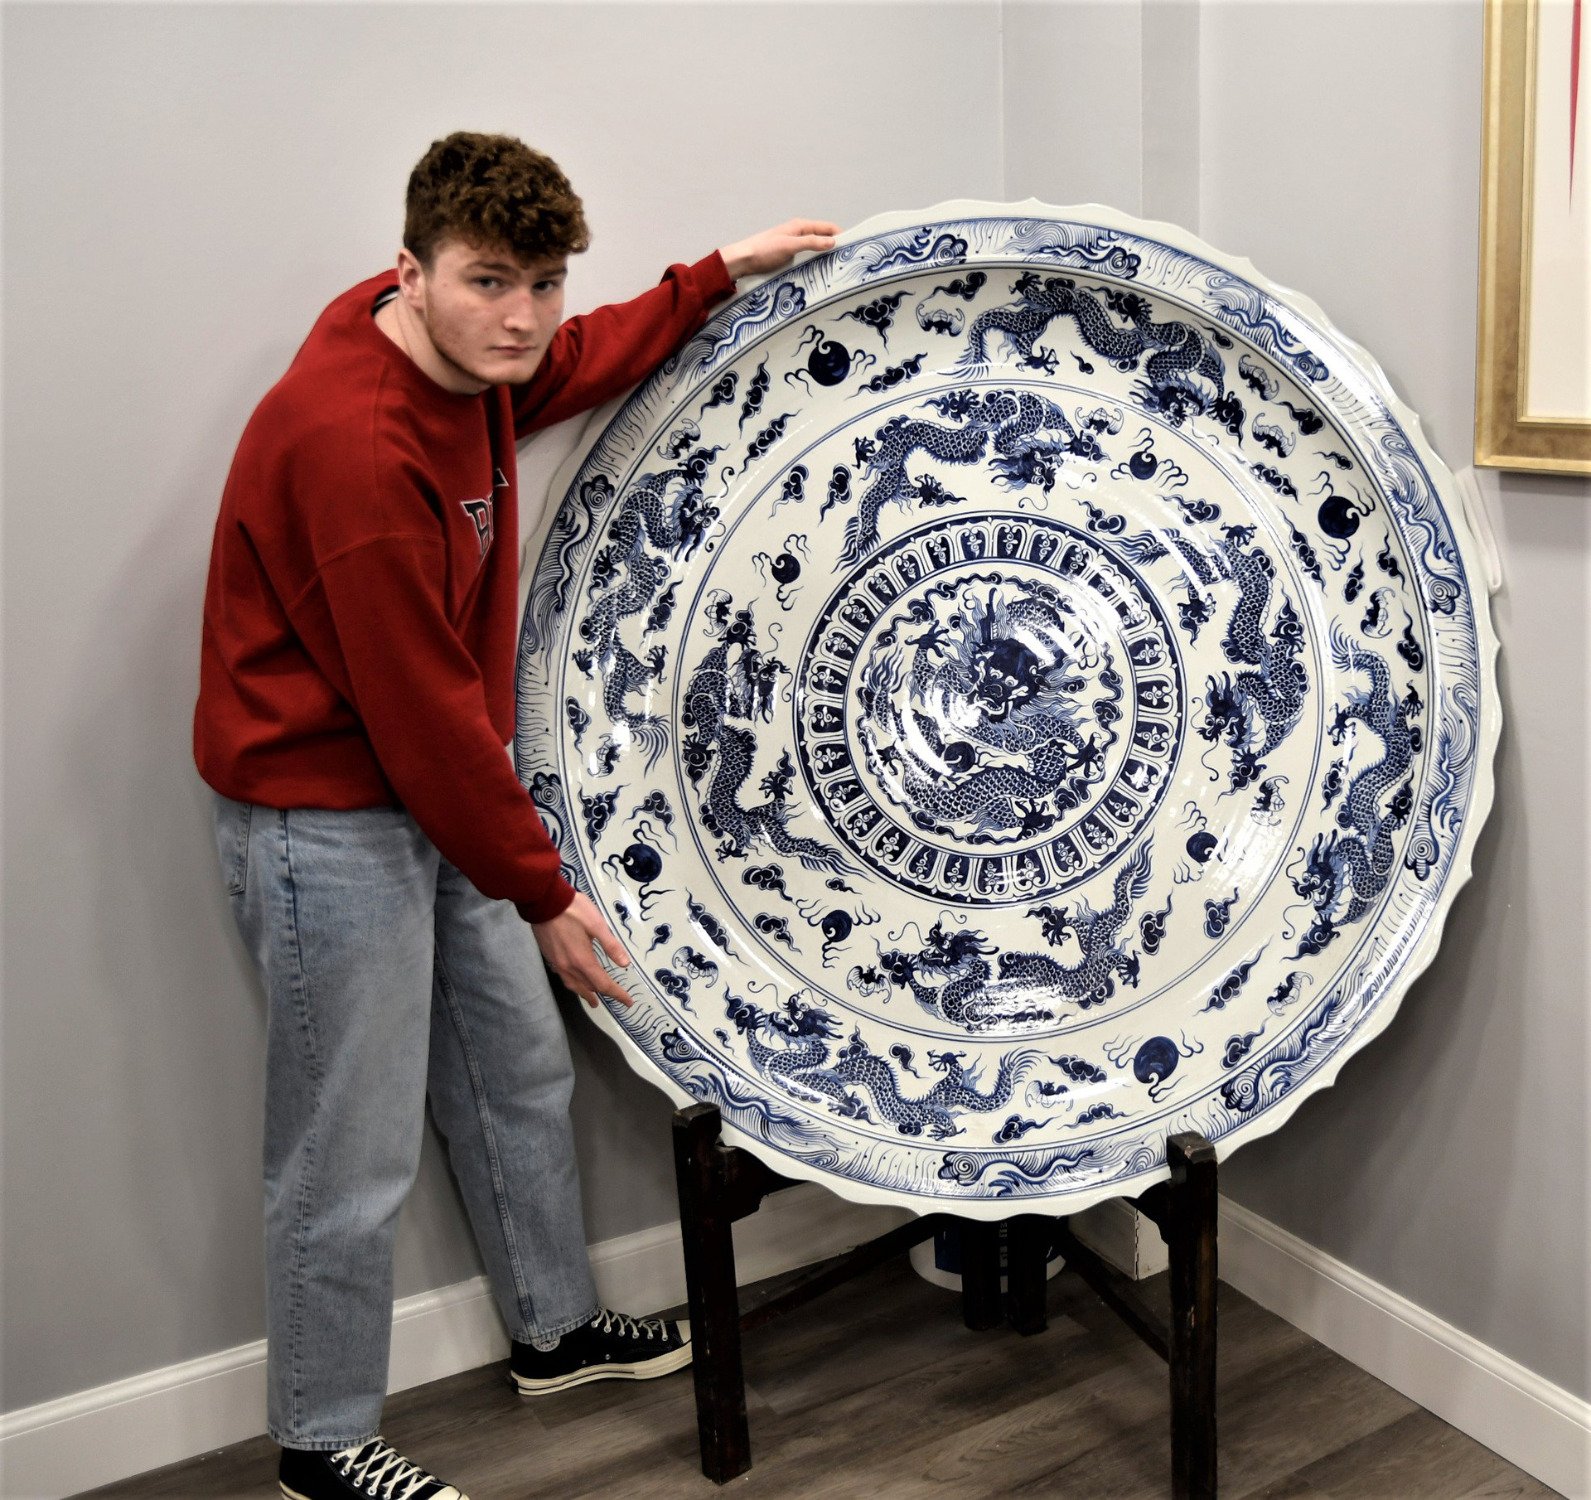 A very heavy large porcelain charger plate with a hand painted dragon design